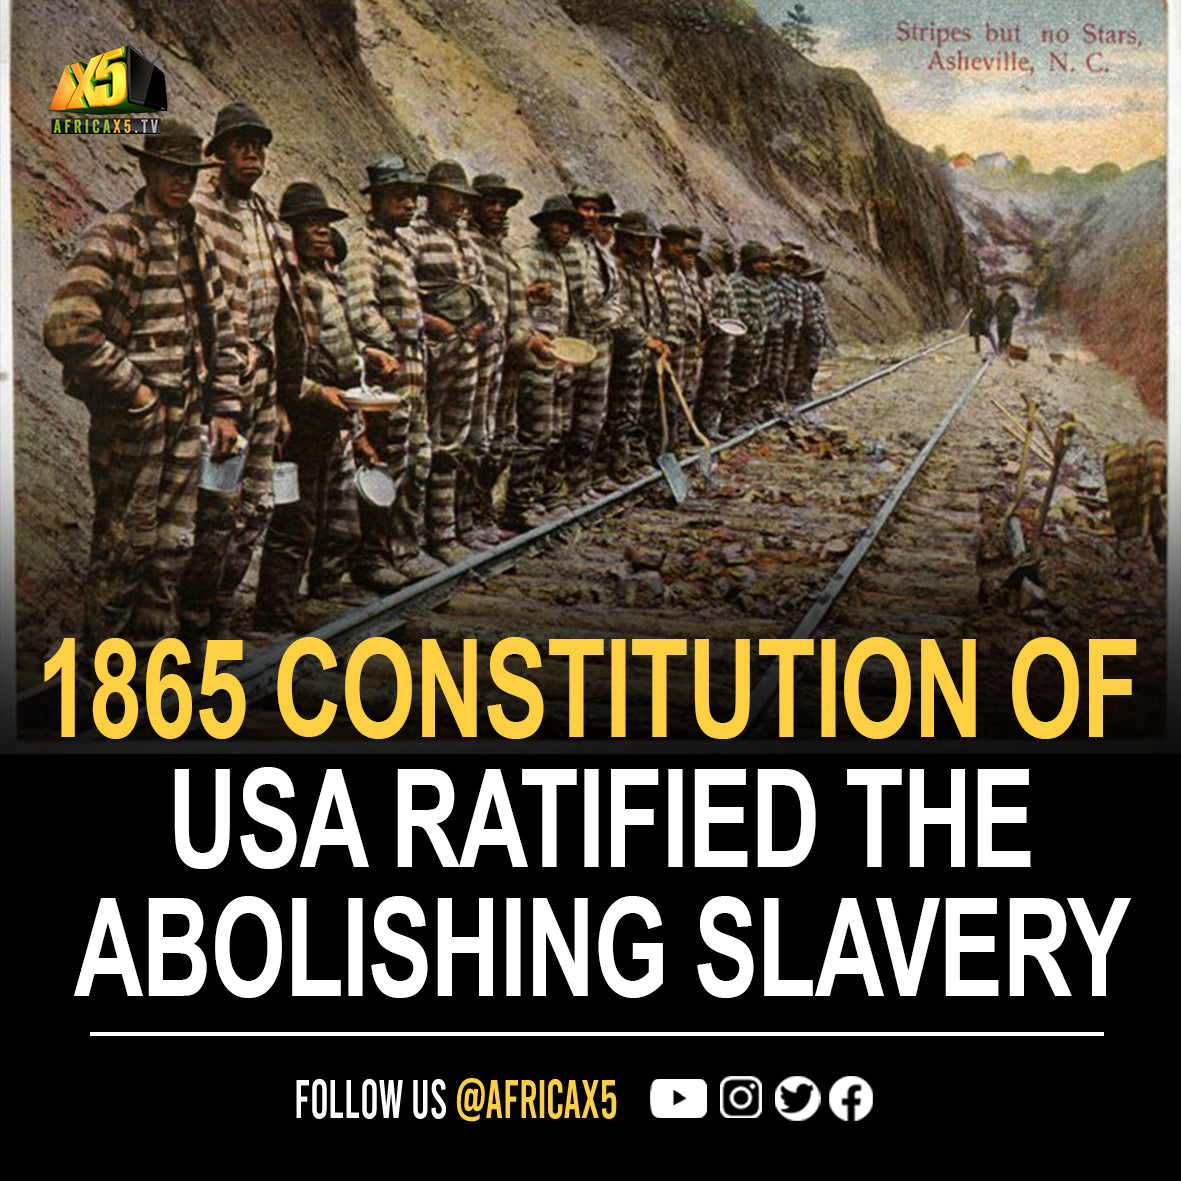 On 1865, the 13th Amendment of the United States Constitution is ratified, abolishing slavery.